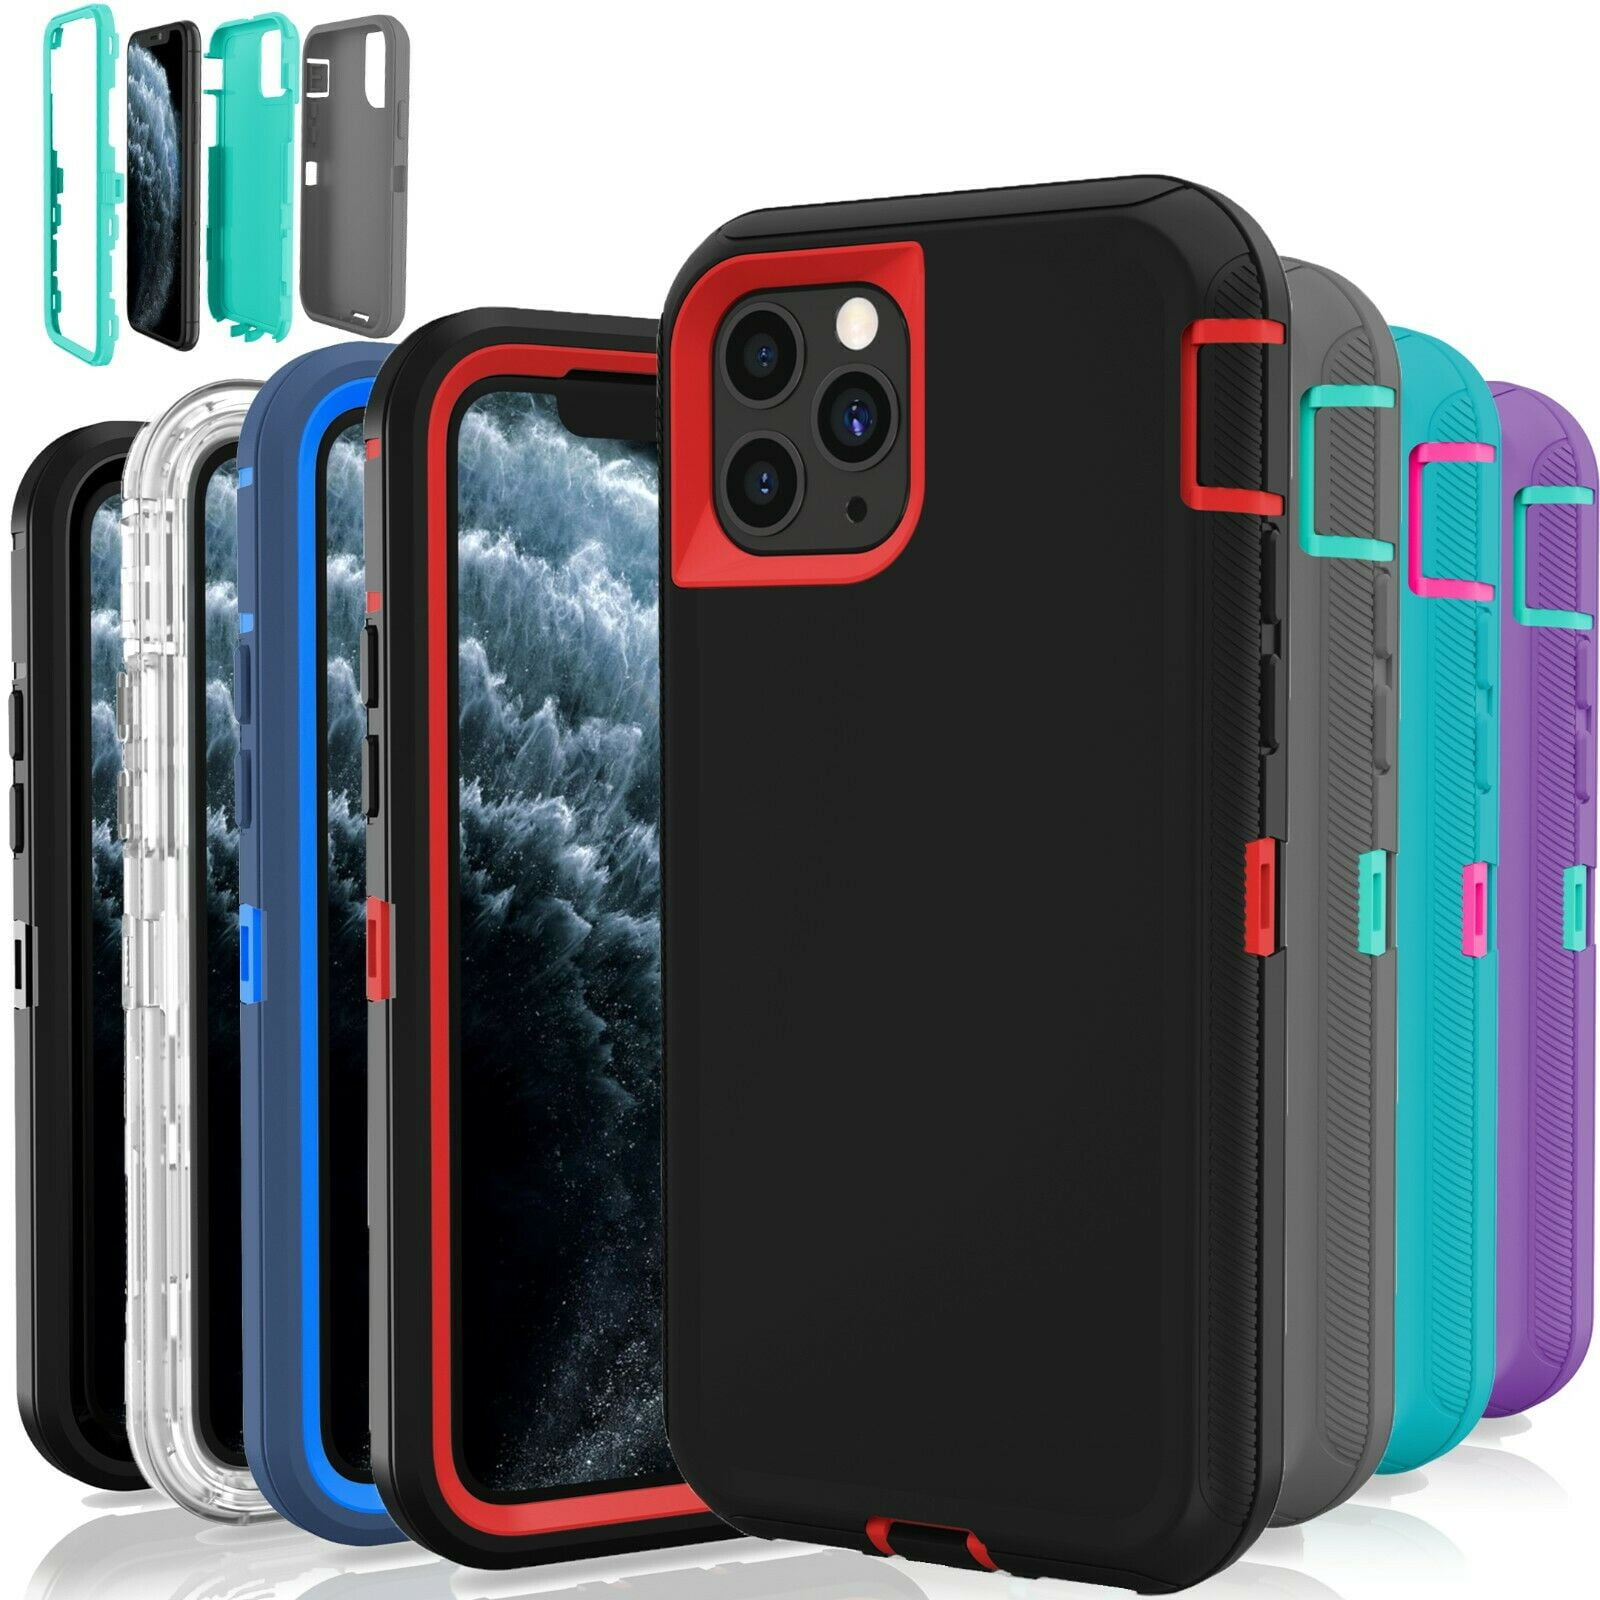 Case For Iphone 11 Pro Iphone 11 Pro Max Defender Case Fits Otter Box Multiple Color Cover Shell For Iphone 11 Black Red Walmart Com